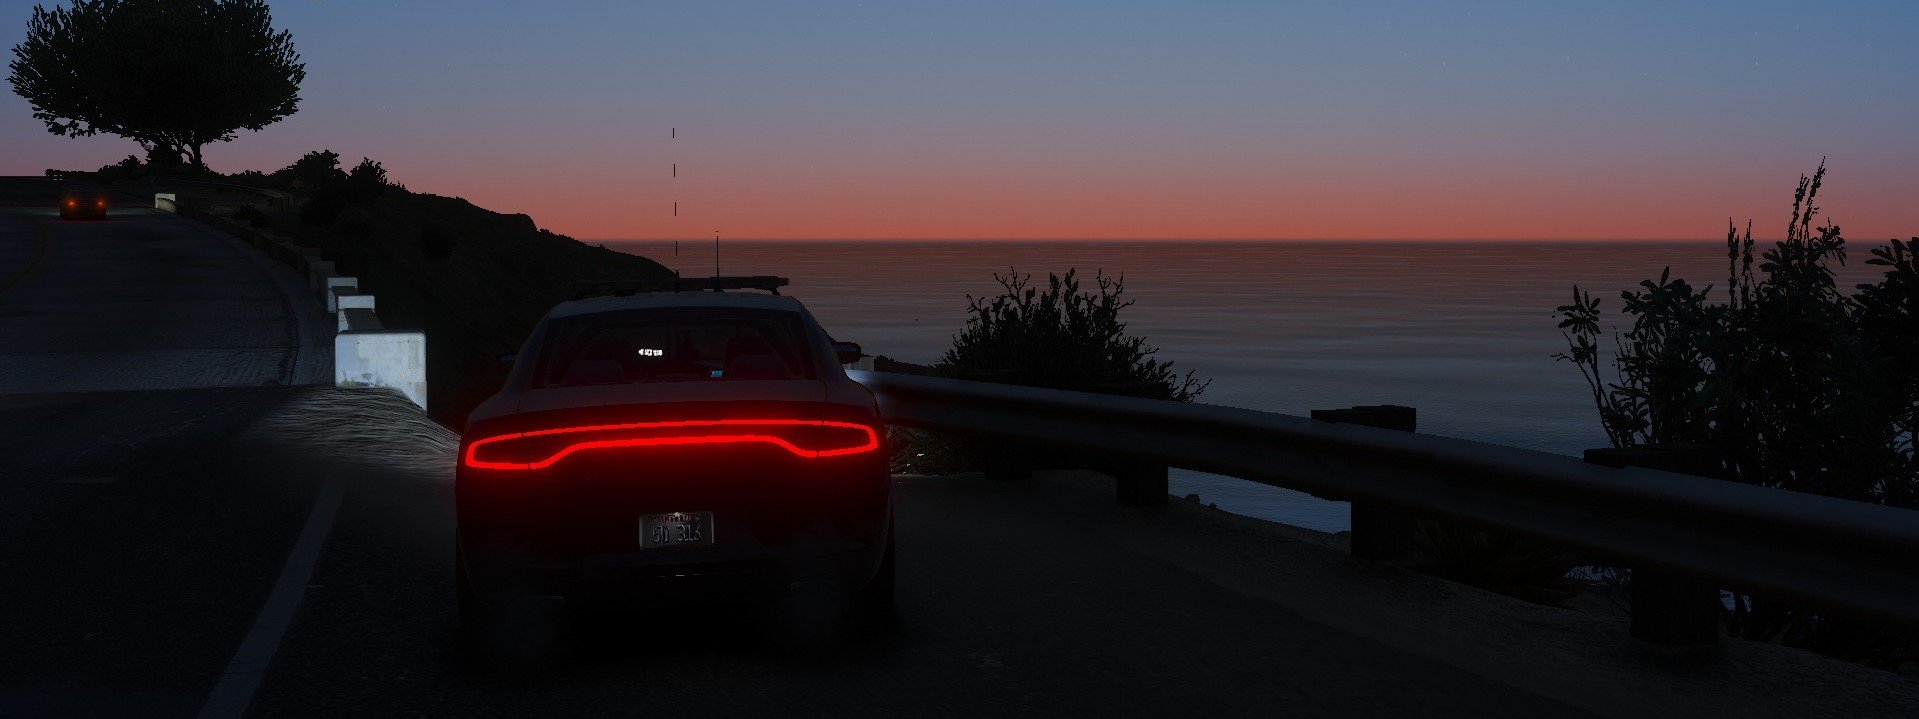 Charger + Sunset = Picture Worthy